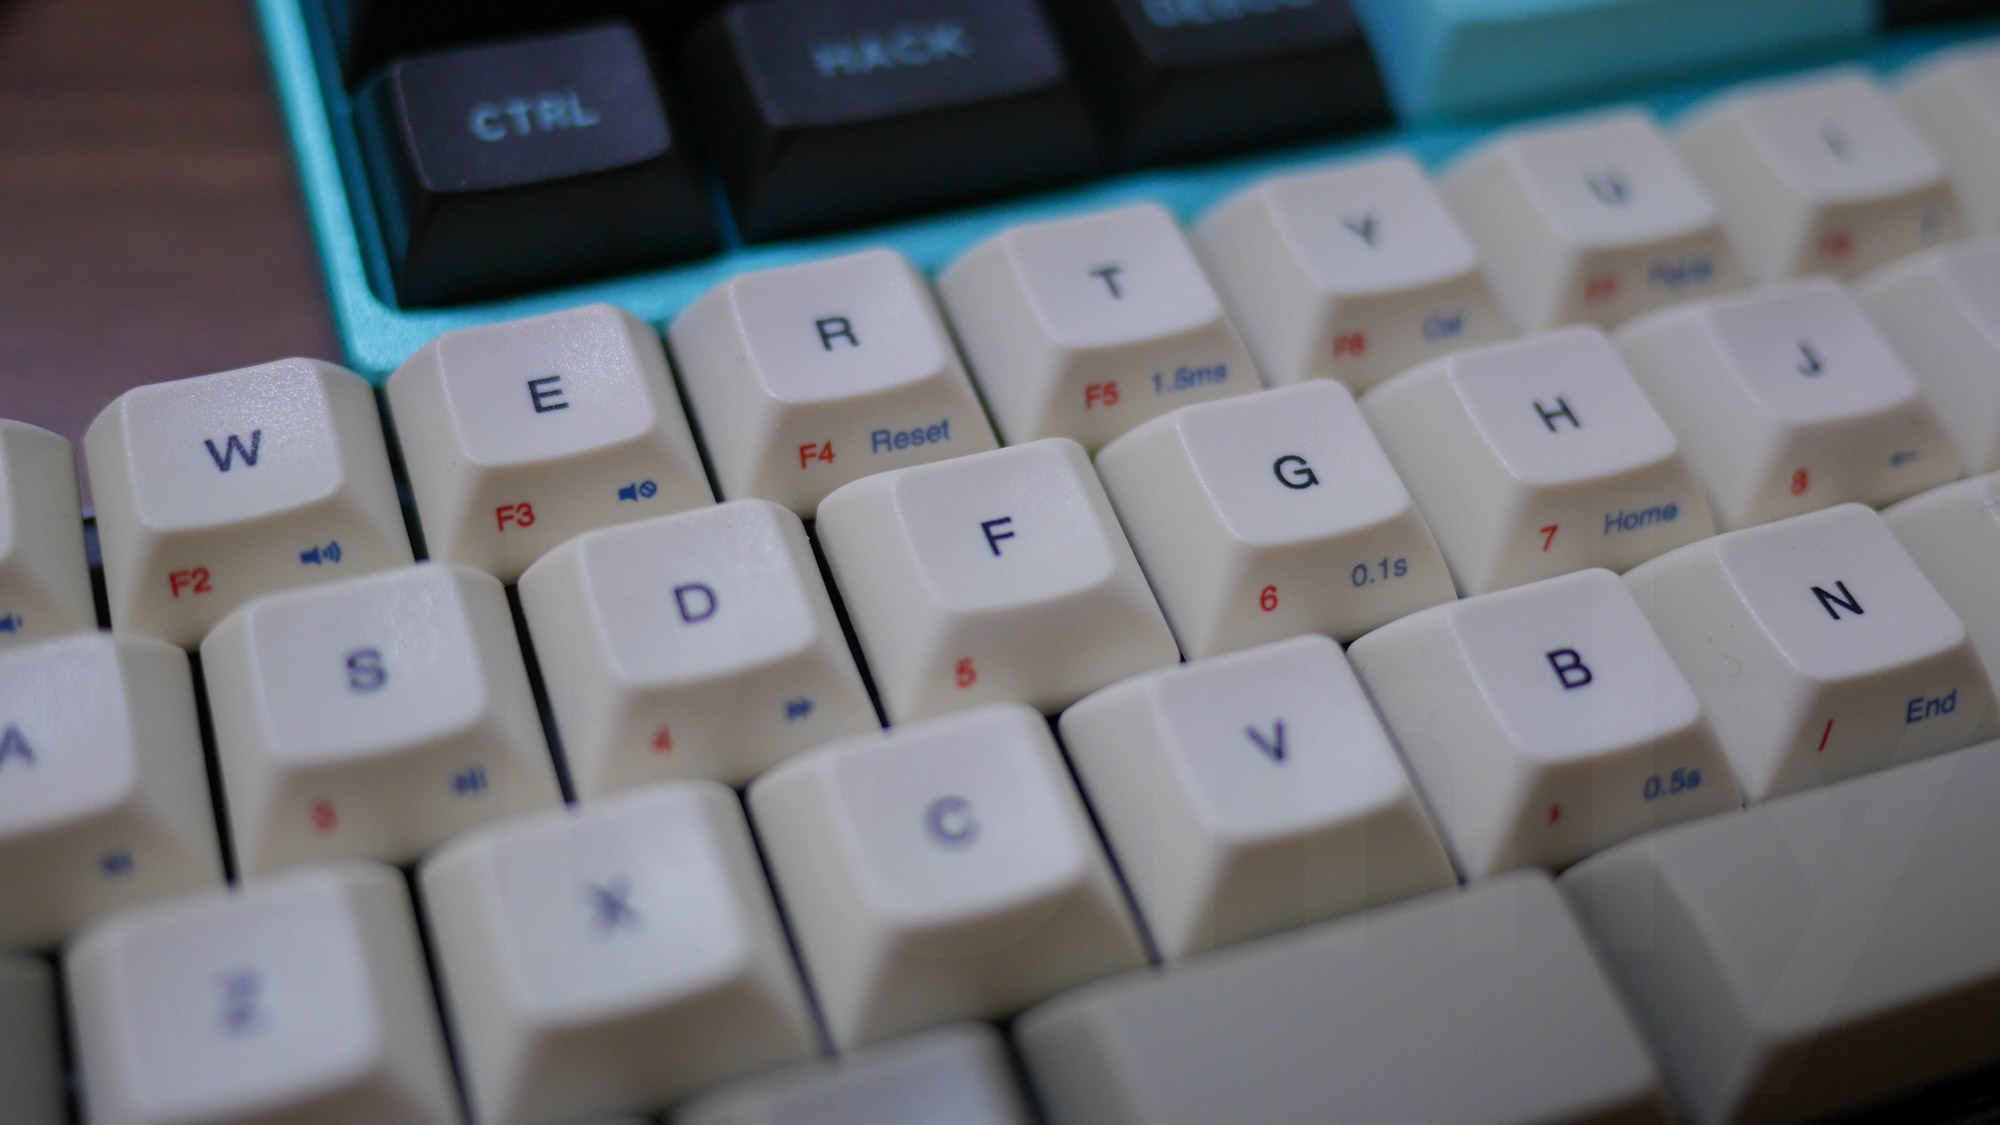 Vortex Core: No homing for F and J key